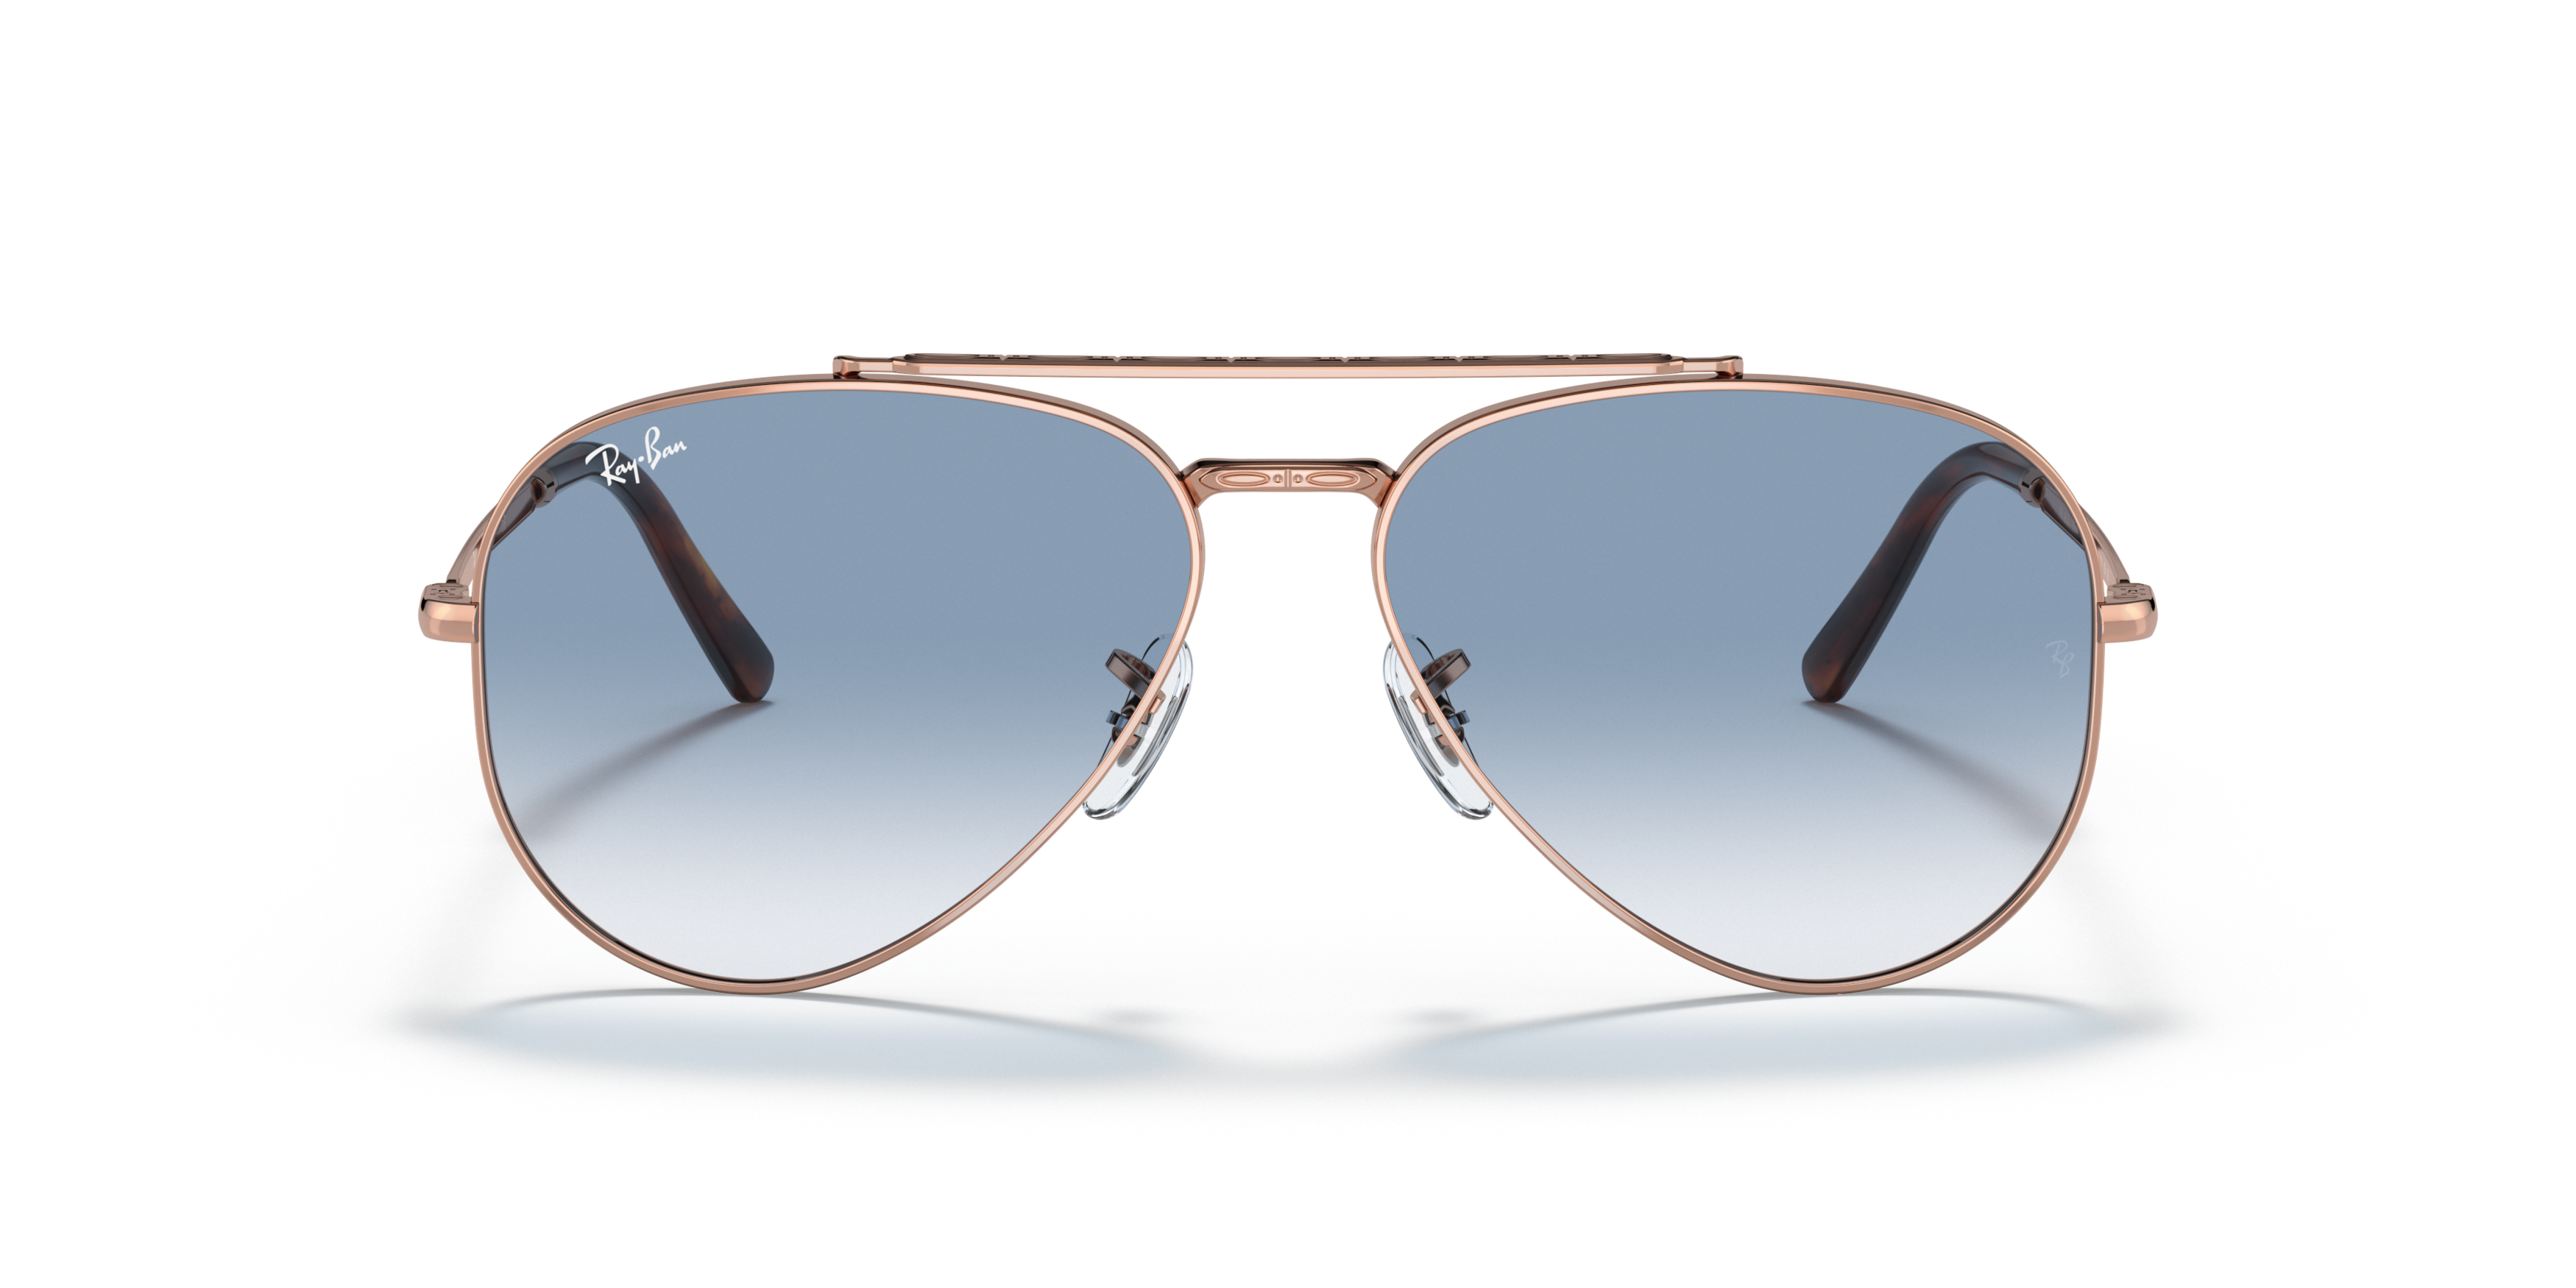 [products.image.front] RAY-BAN RB3625 92023F